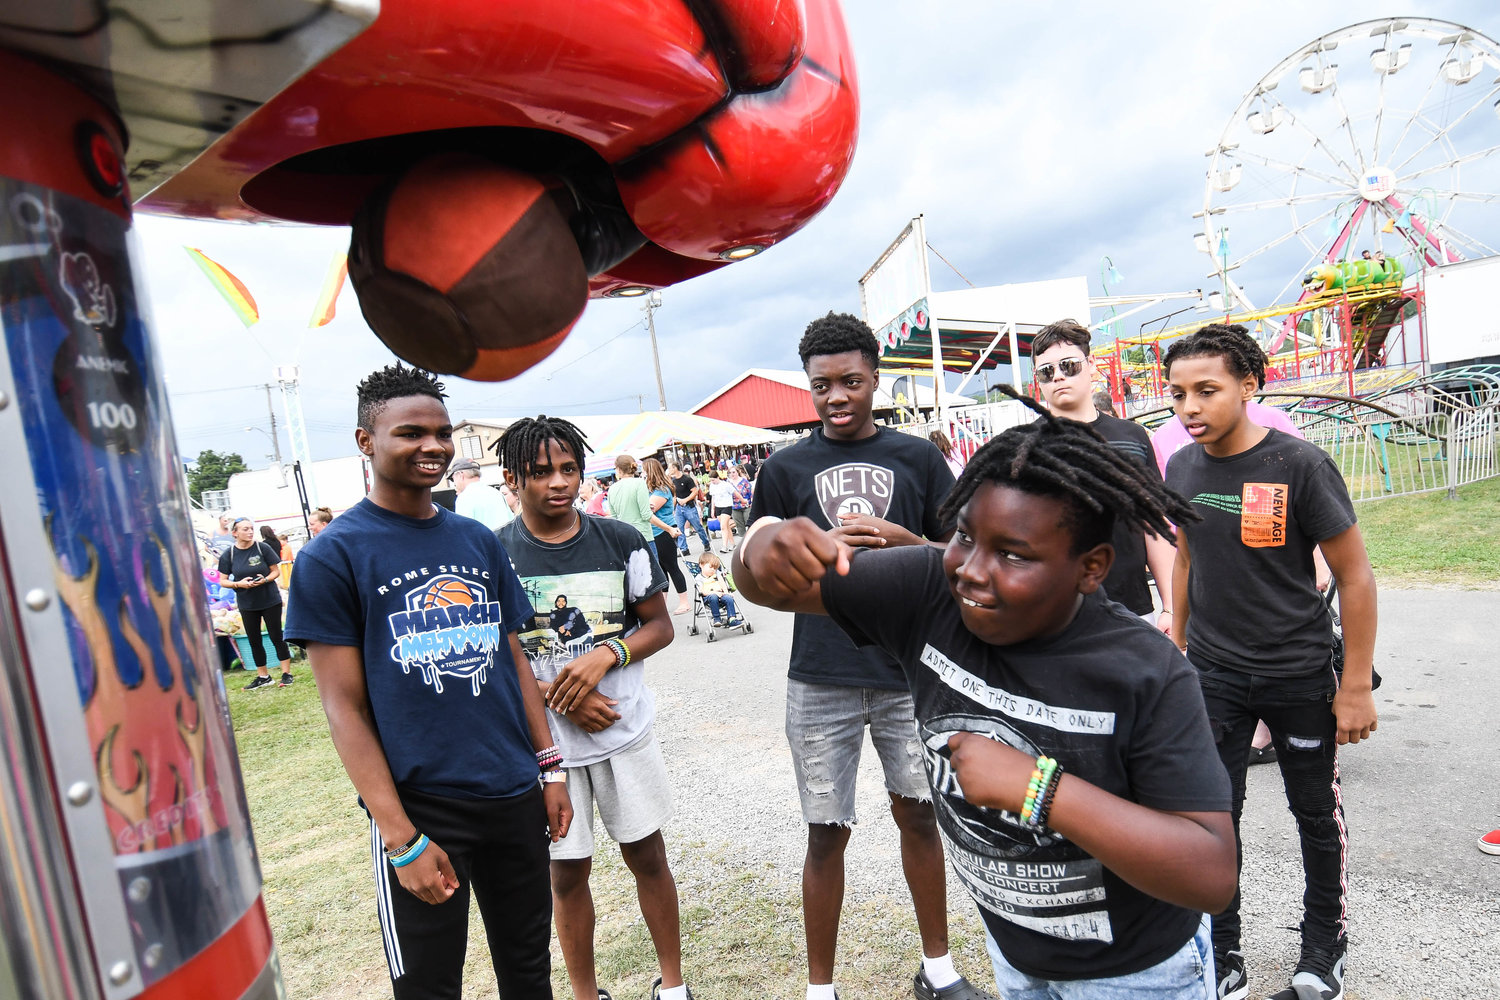 Fairgoers take turns hitting a boxing punch machine on Thursday at the Herkimer County Fair in Frankfort.